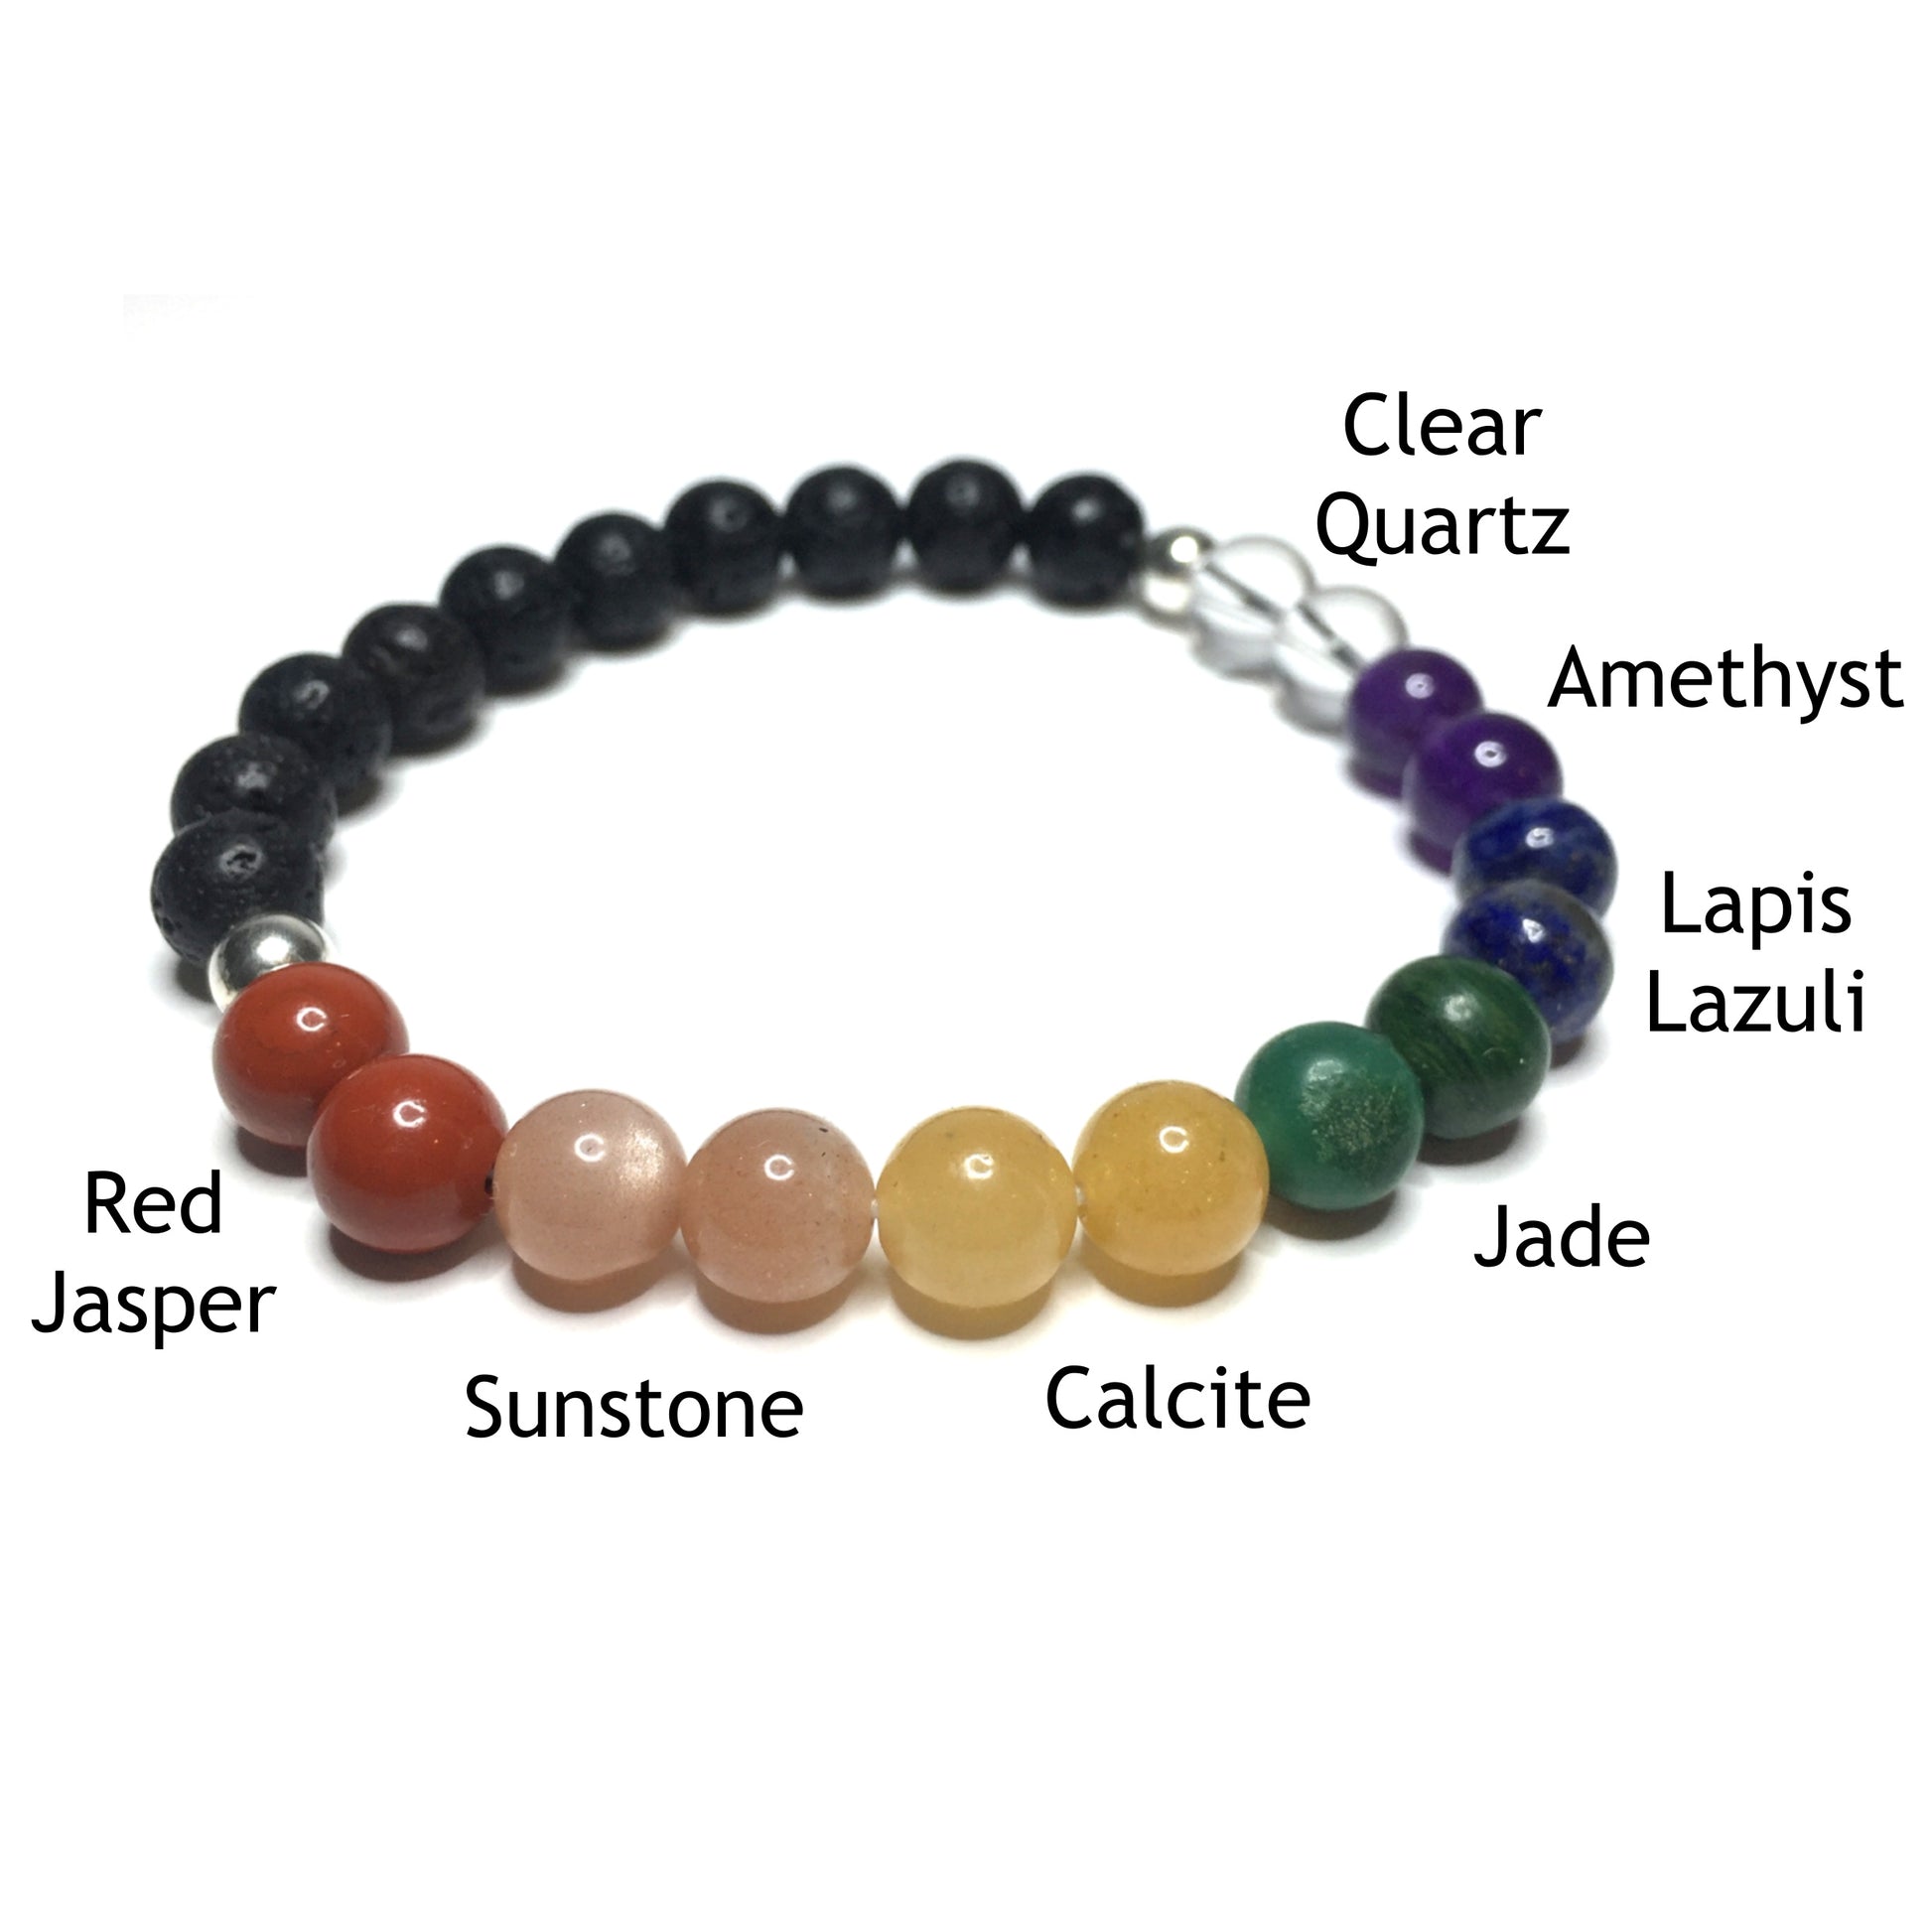 Chakra bracelet with the beads labelled as red jasper, sunstone, calcite, jade, lapis lazuli, amethyst and clear quartz